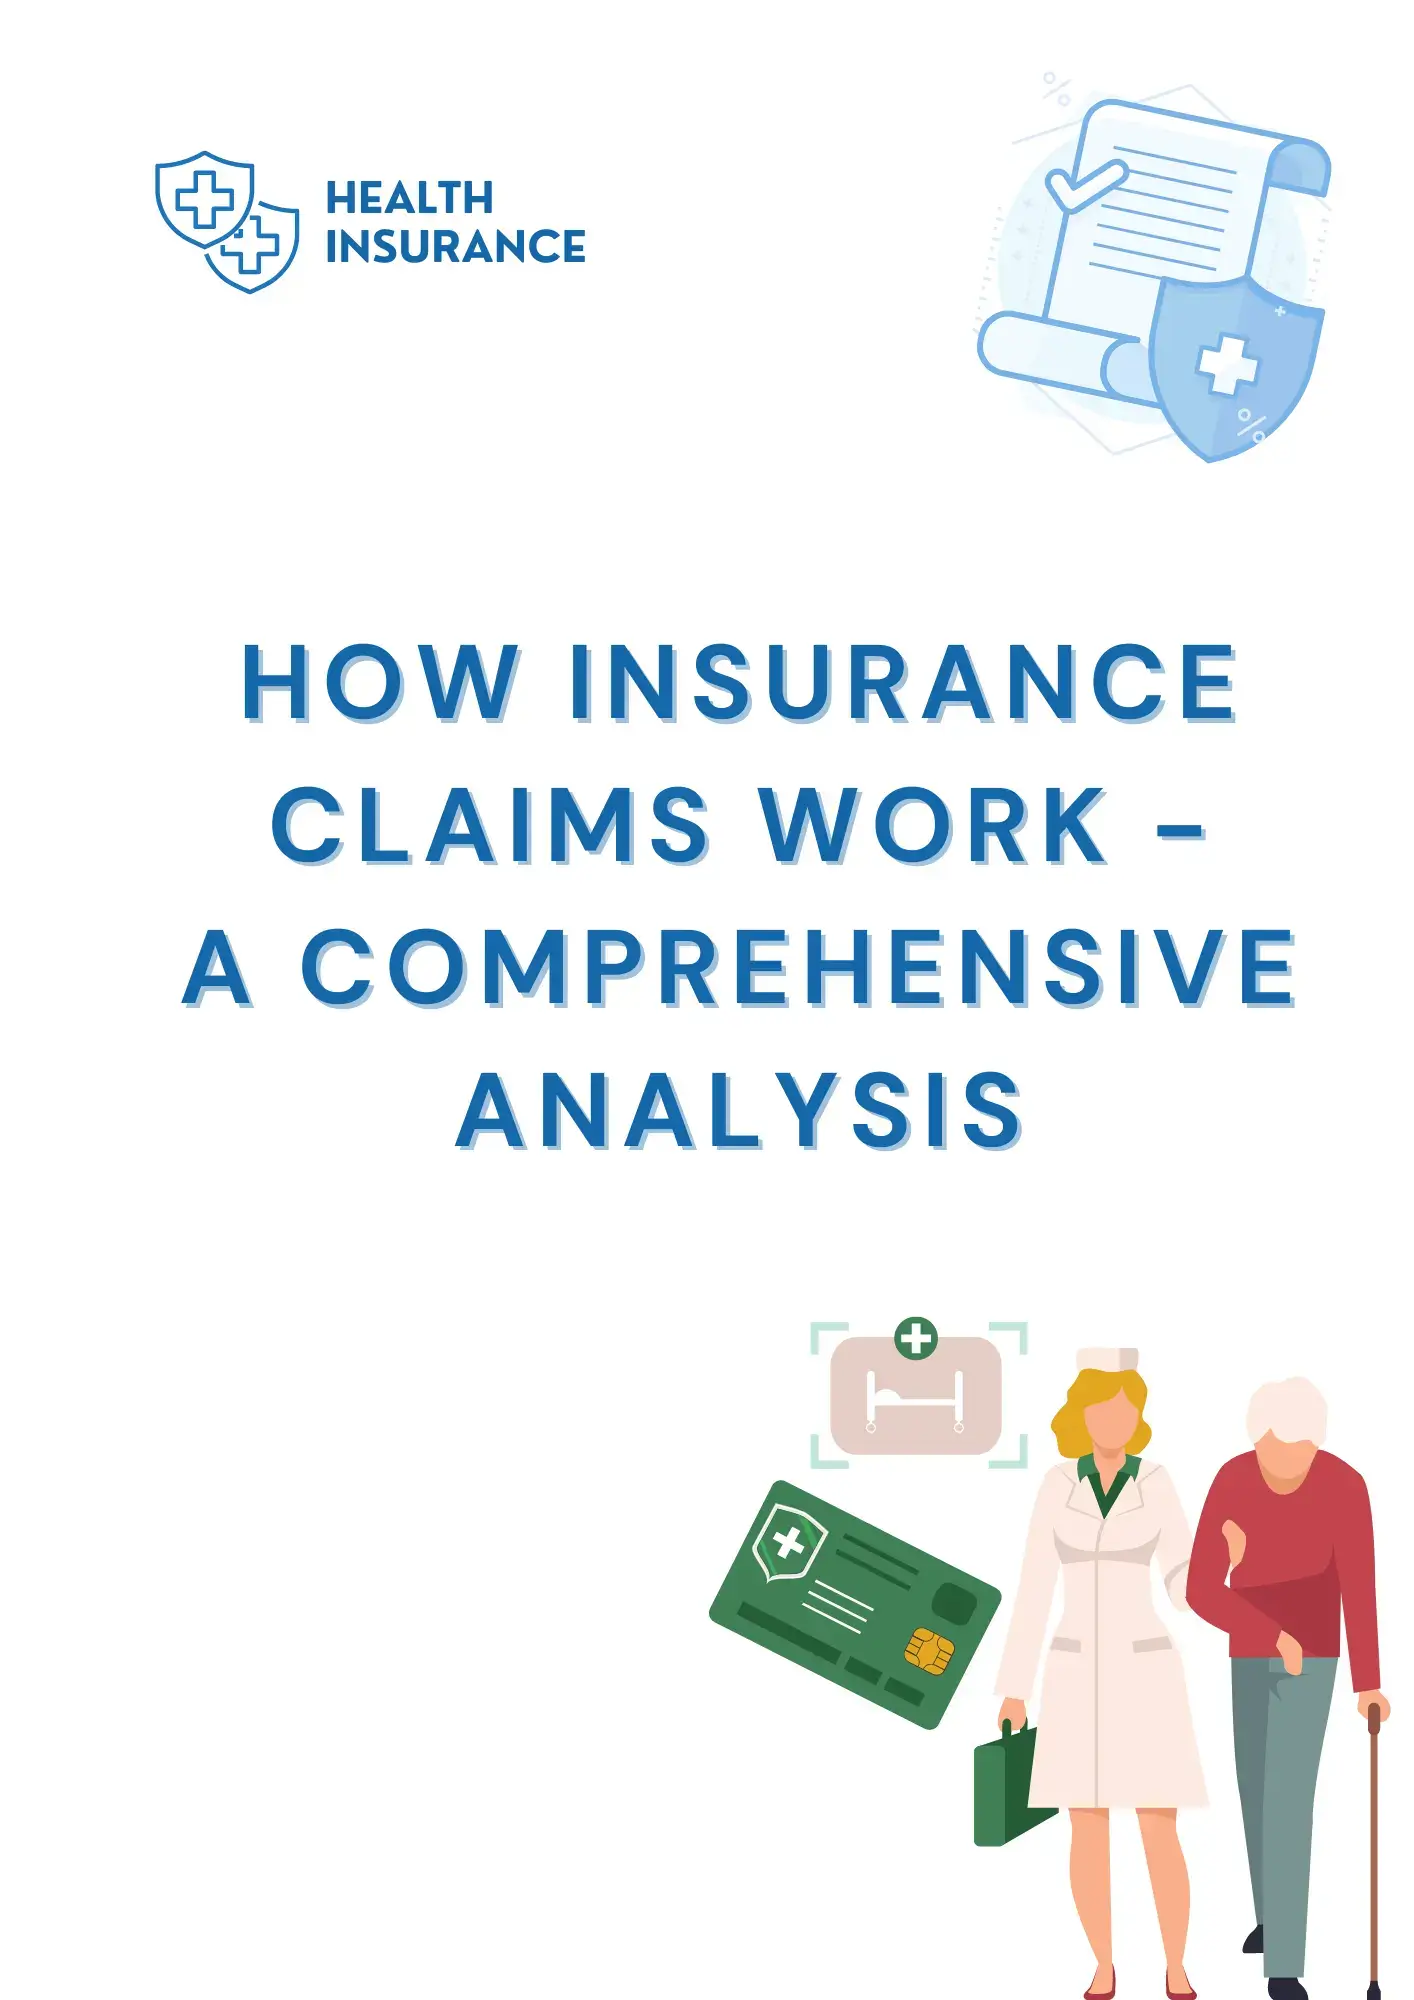 How Insurance Claims Work - A Comprehensive Analysis